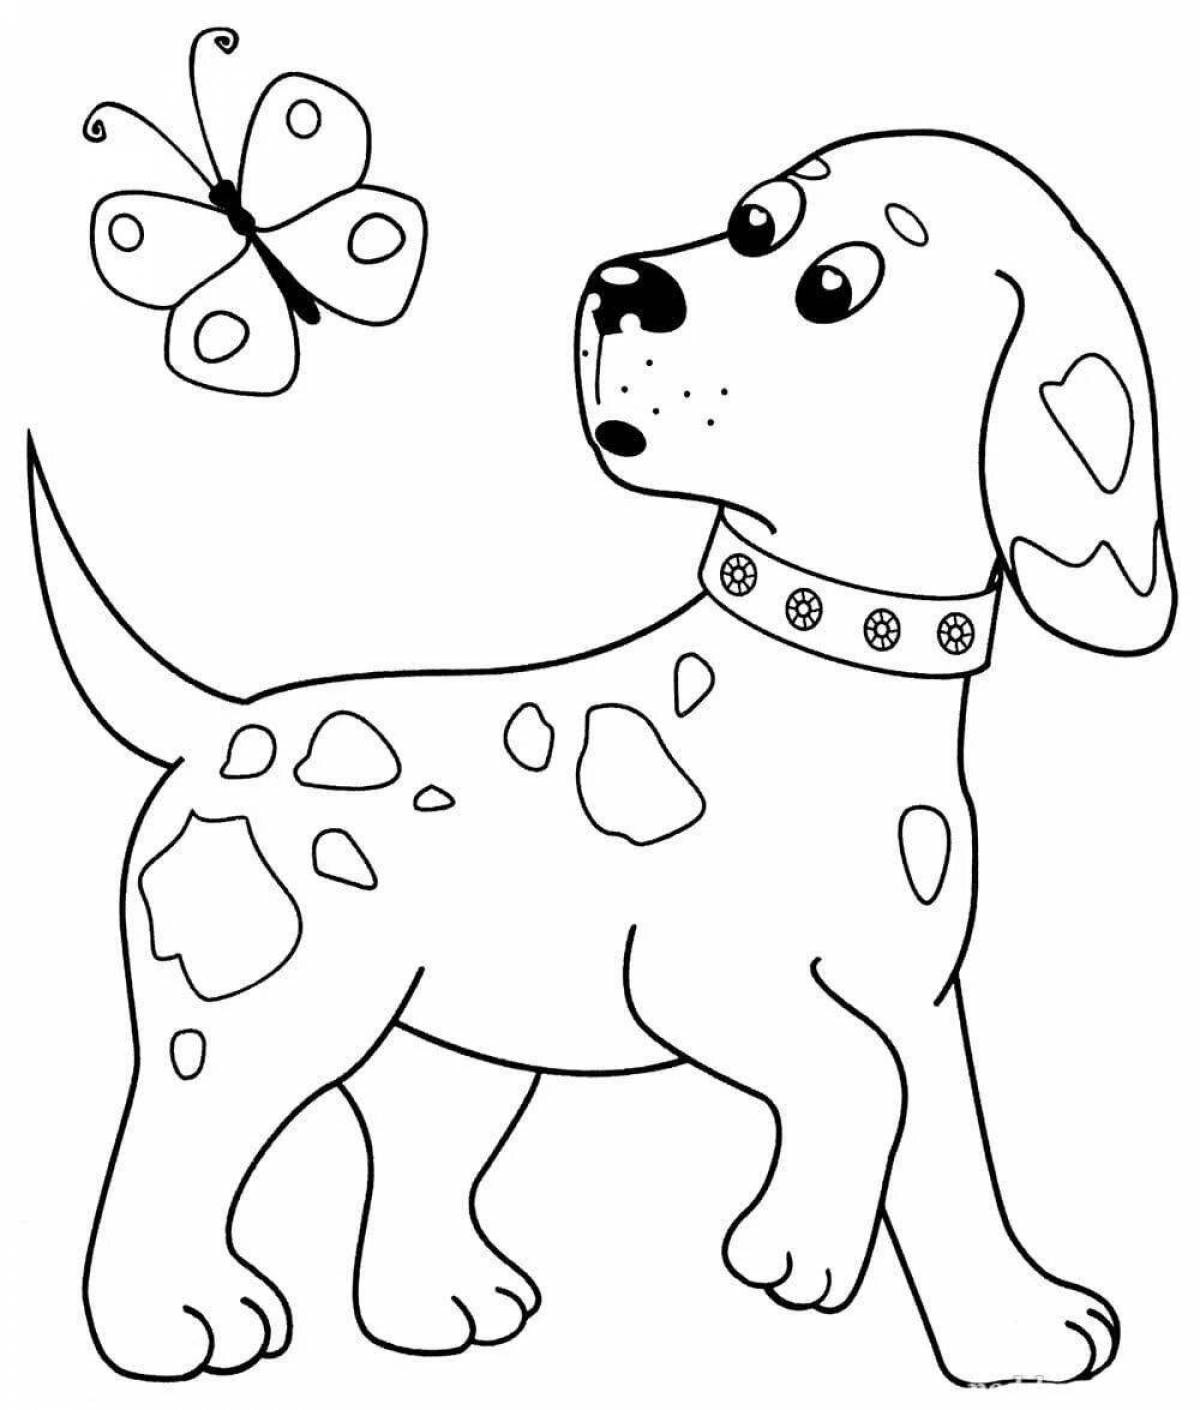 Naughty puppy coloring book for toddlers